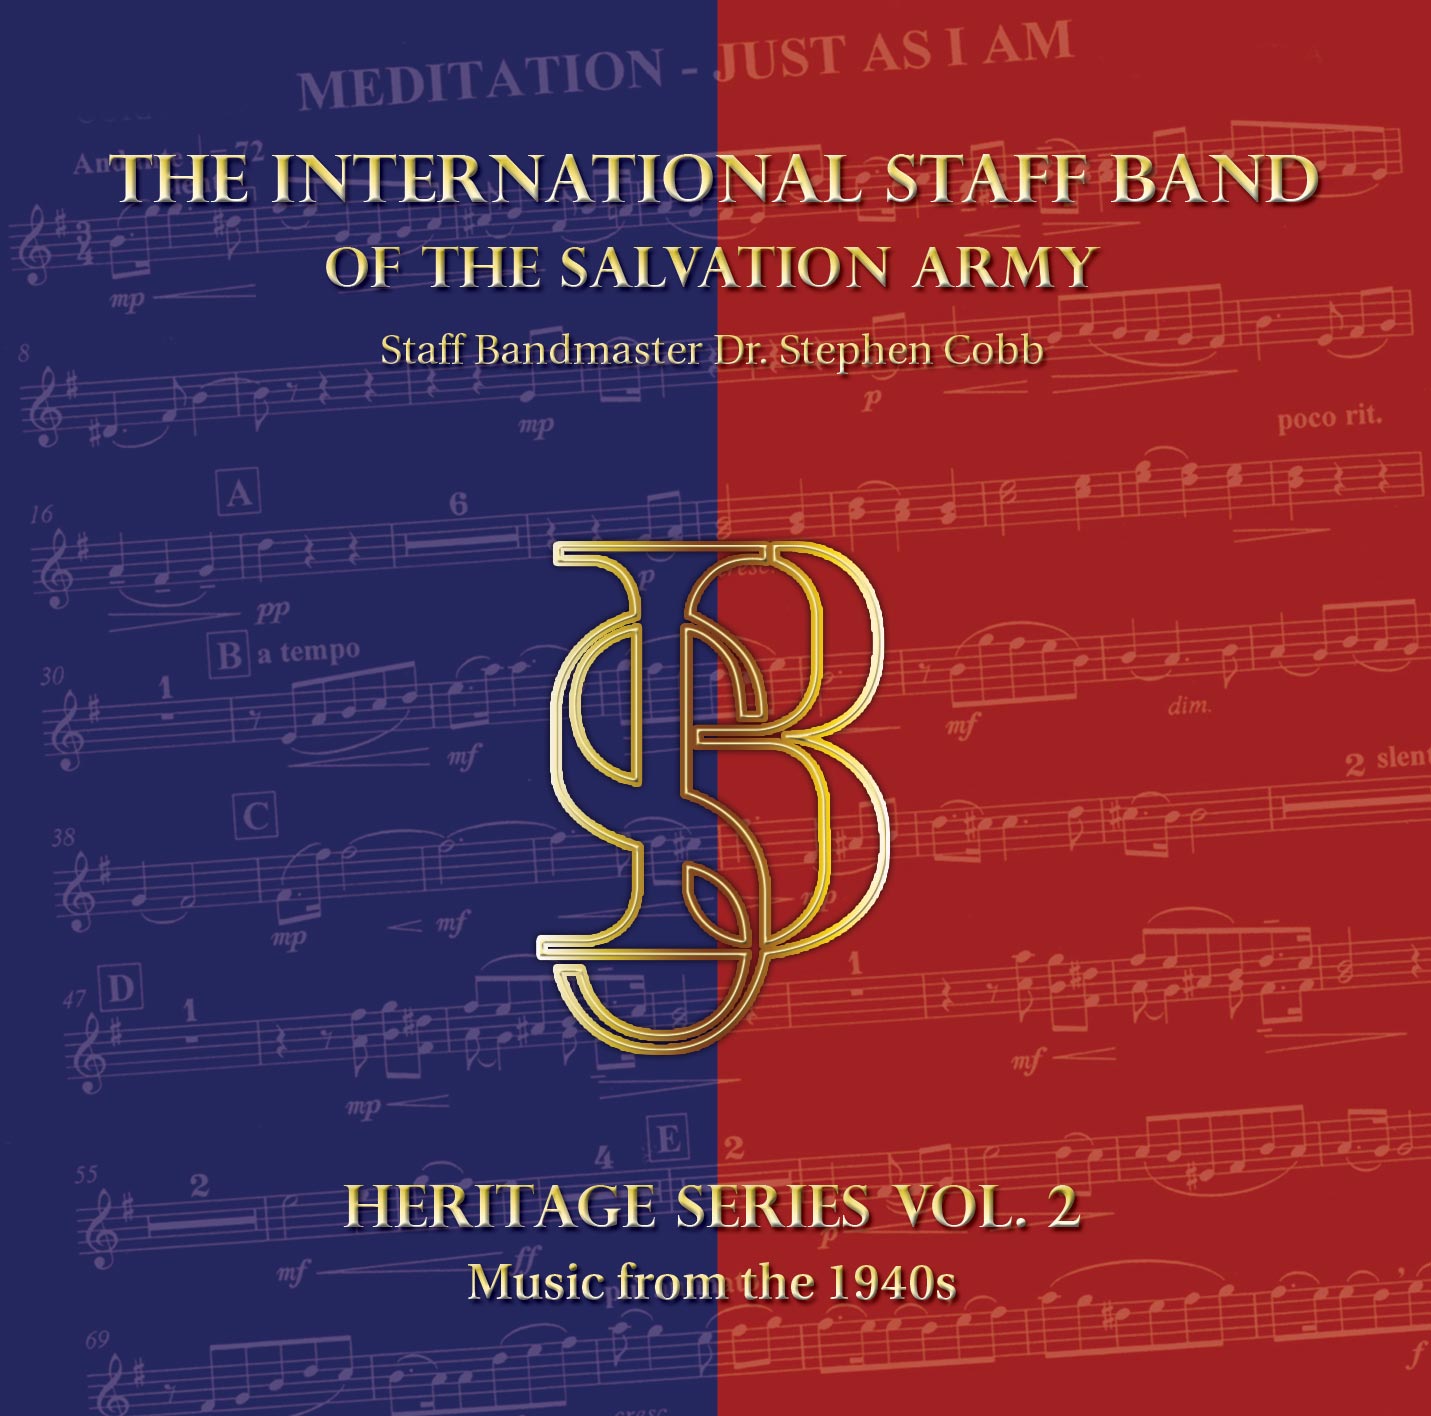 ISB Heritage Series Vol. 2 - Music from the 1940s - CD